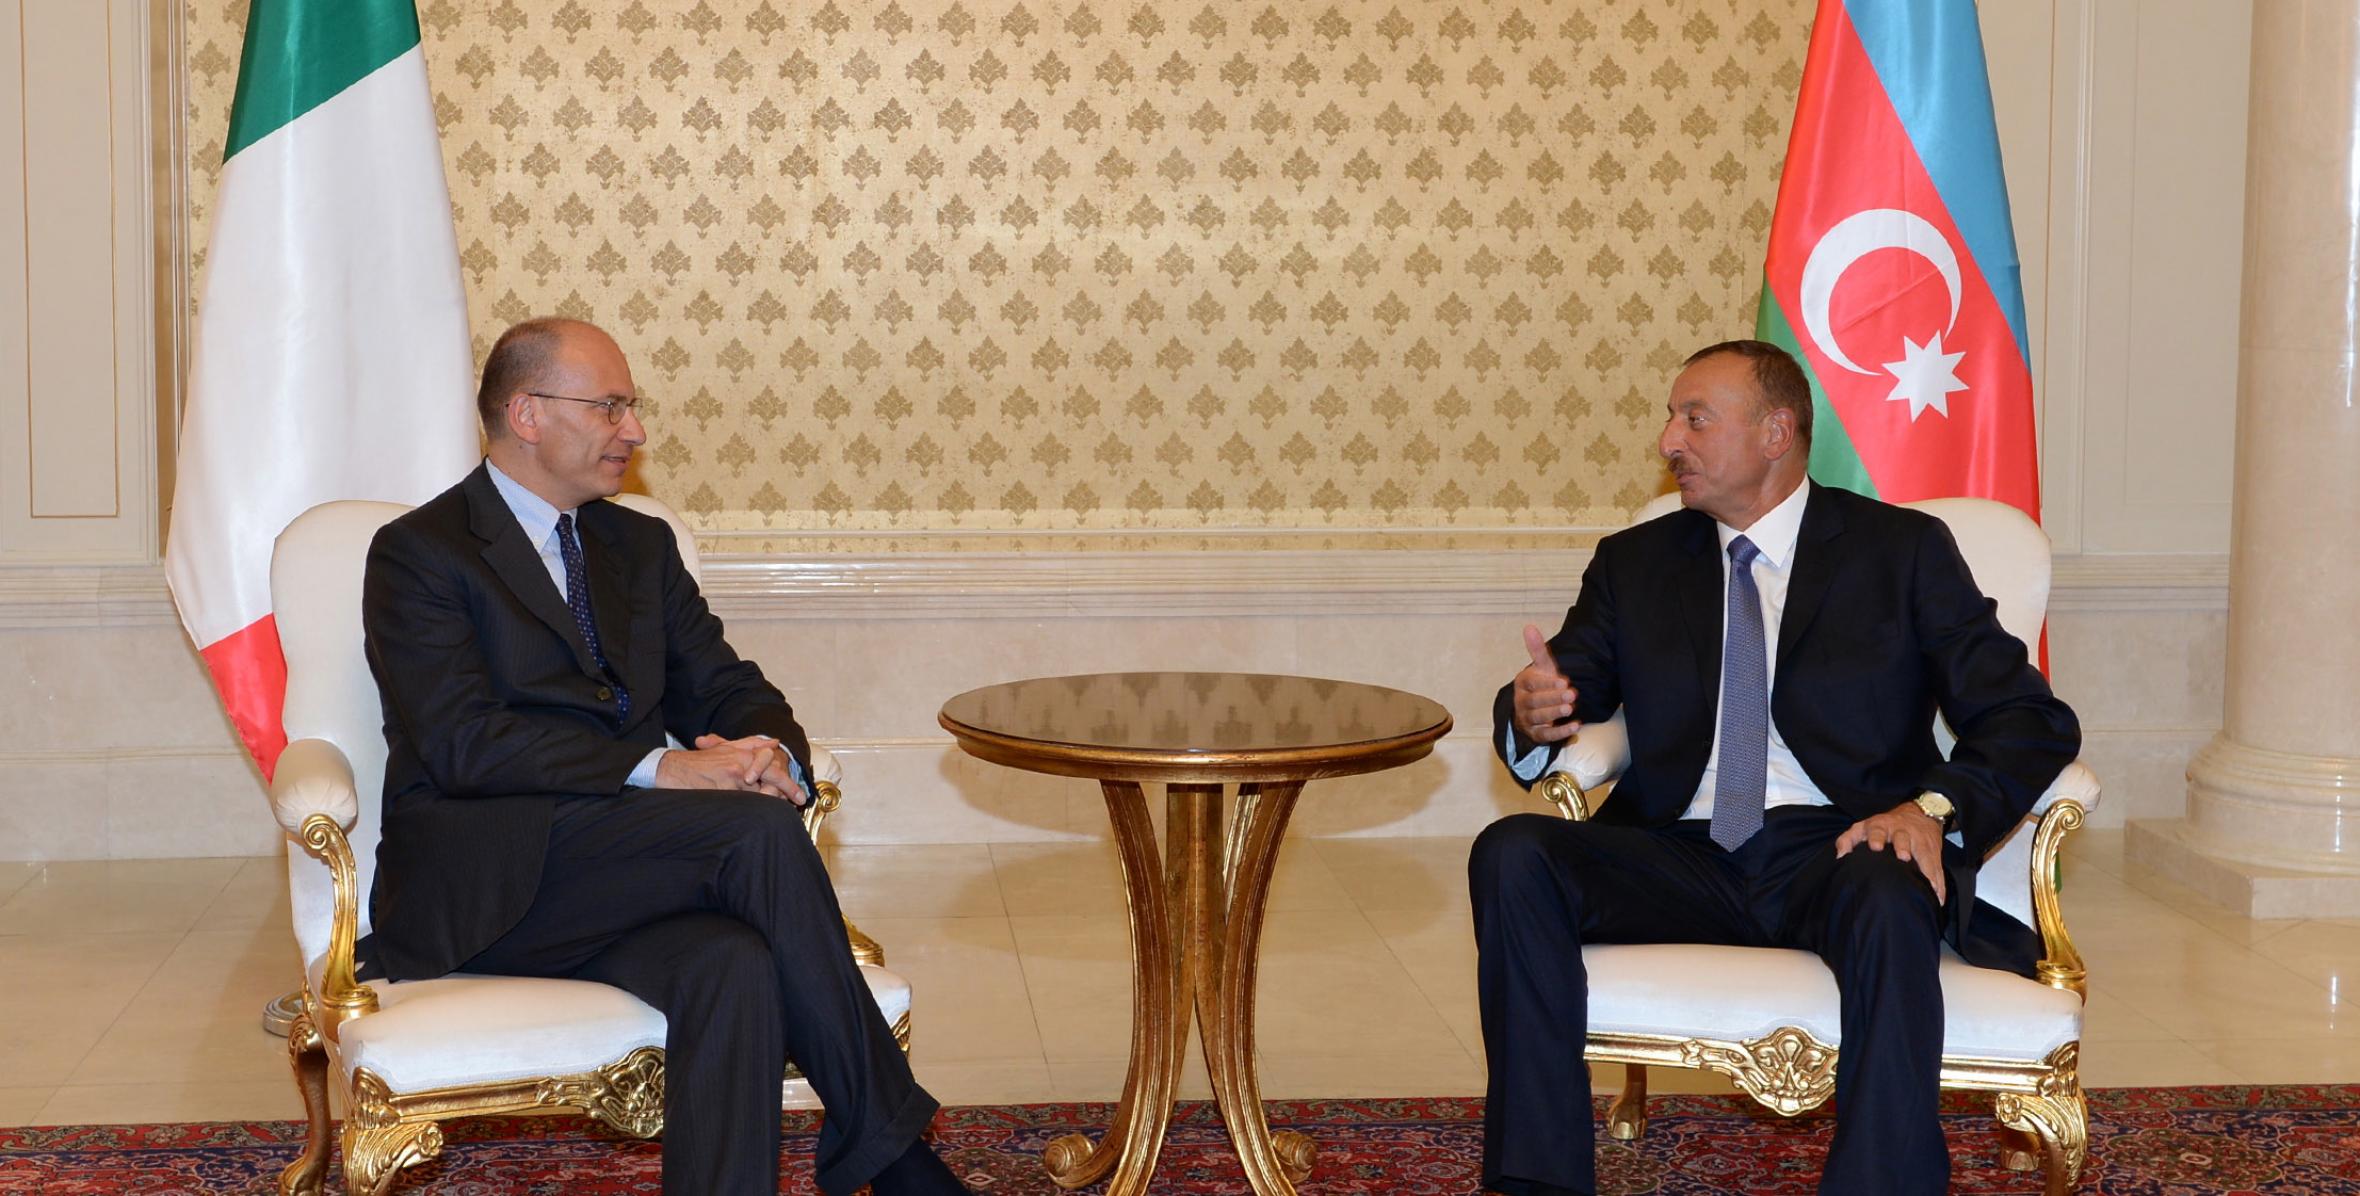 Ilham Aliyev and President of the Council of Ministers of Italy Enrico Letta held a one-on-one meeting